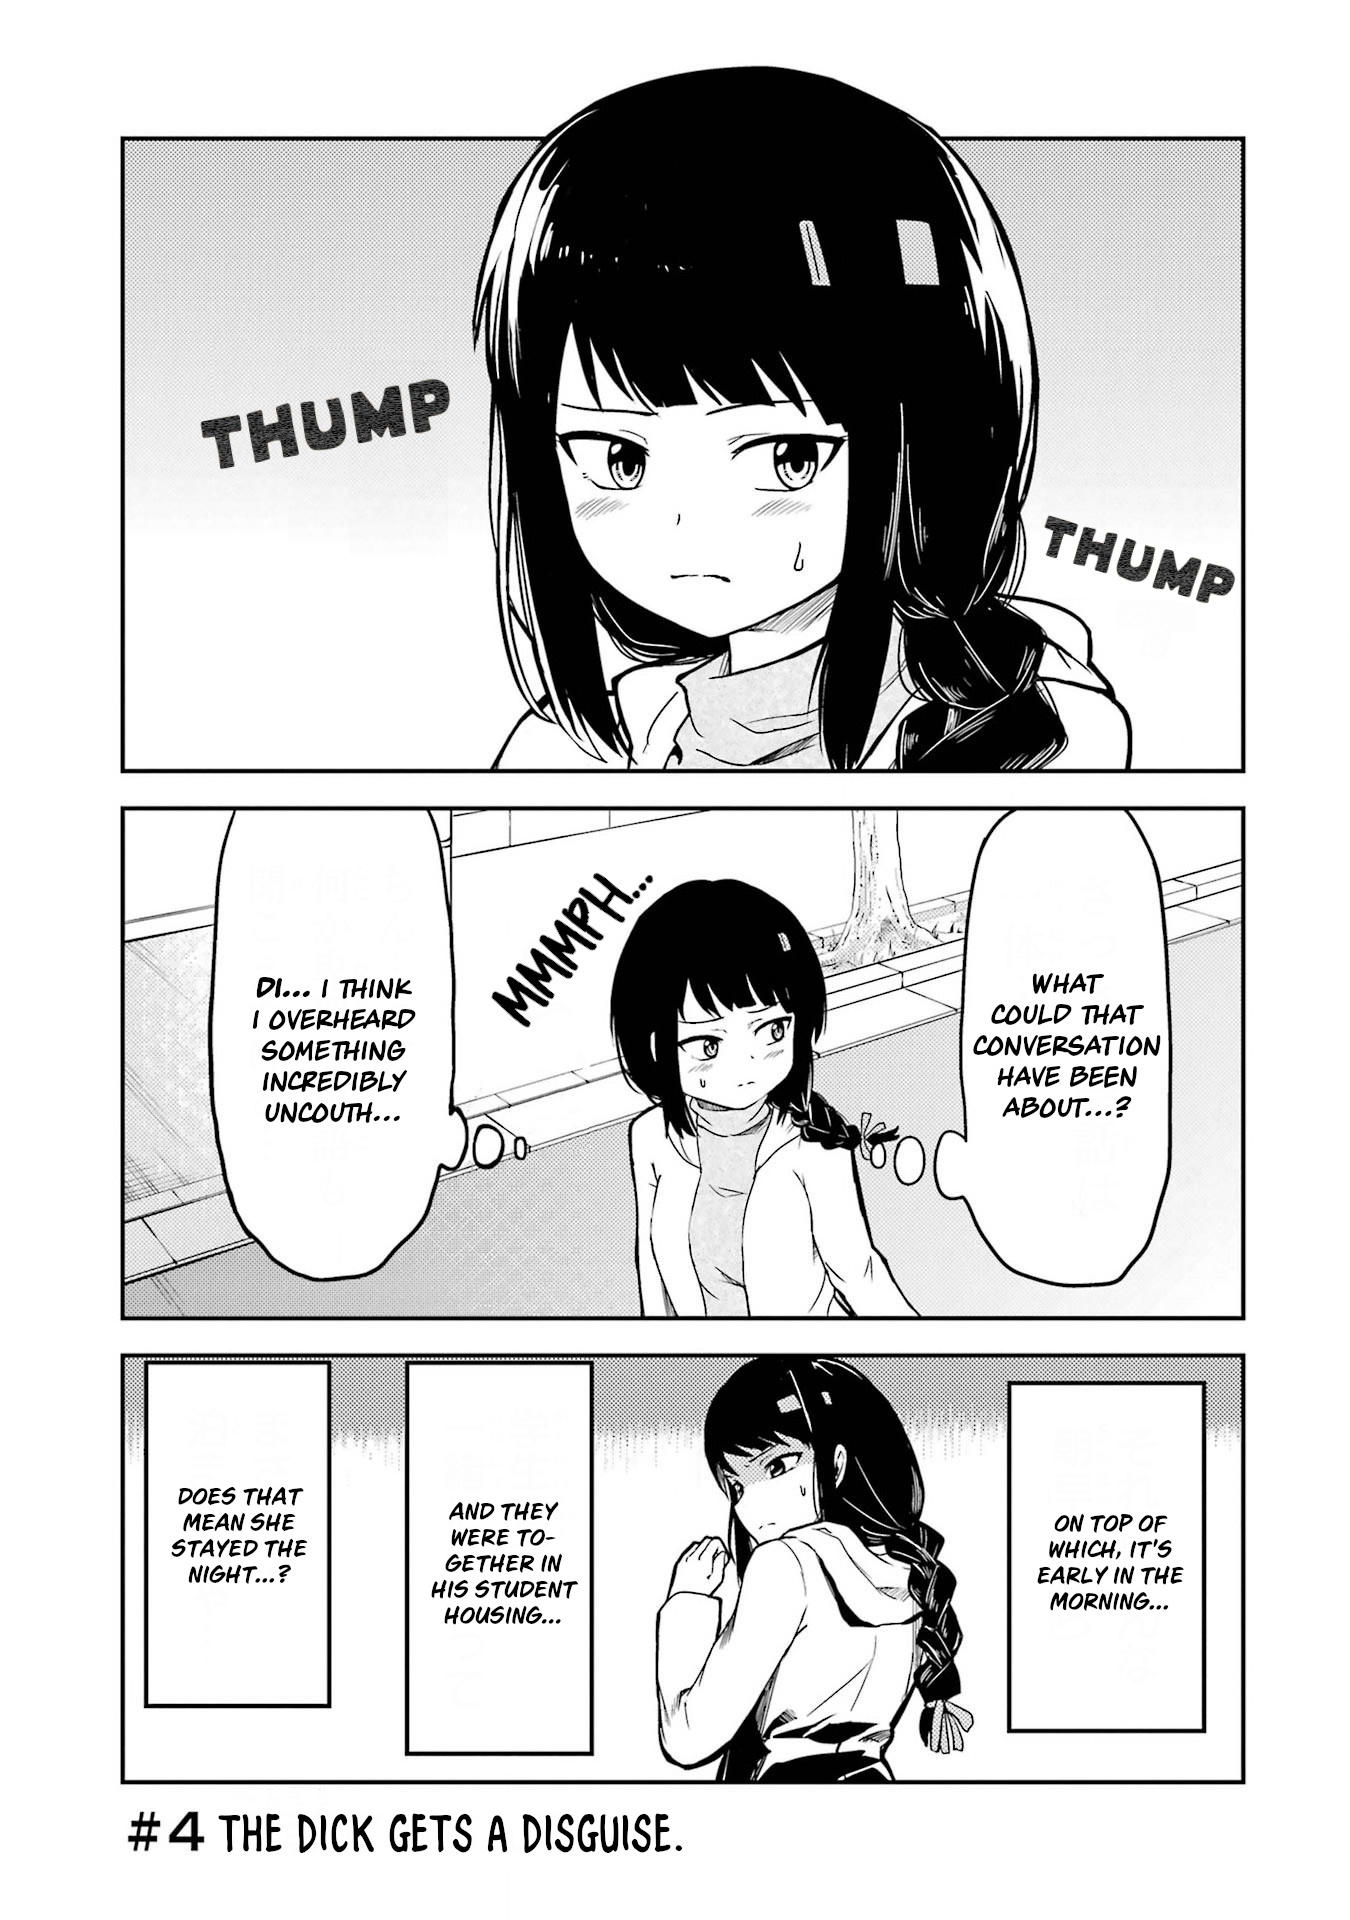 Turns Out My Dick Was A Cute Girl Vol.1 Chapter 4: The Dick Gets A Disguise - Picture 1